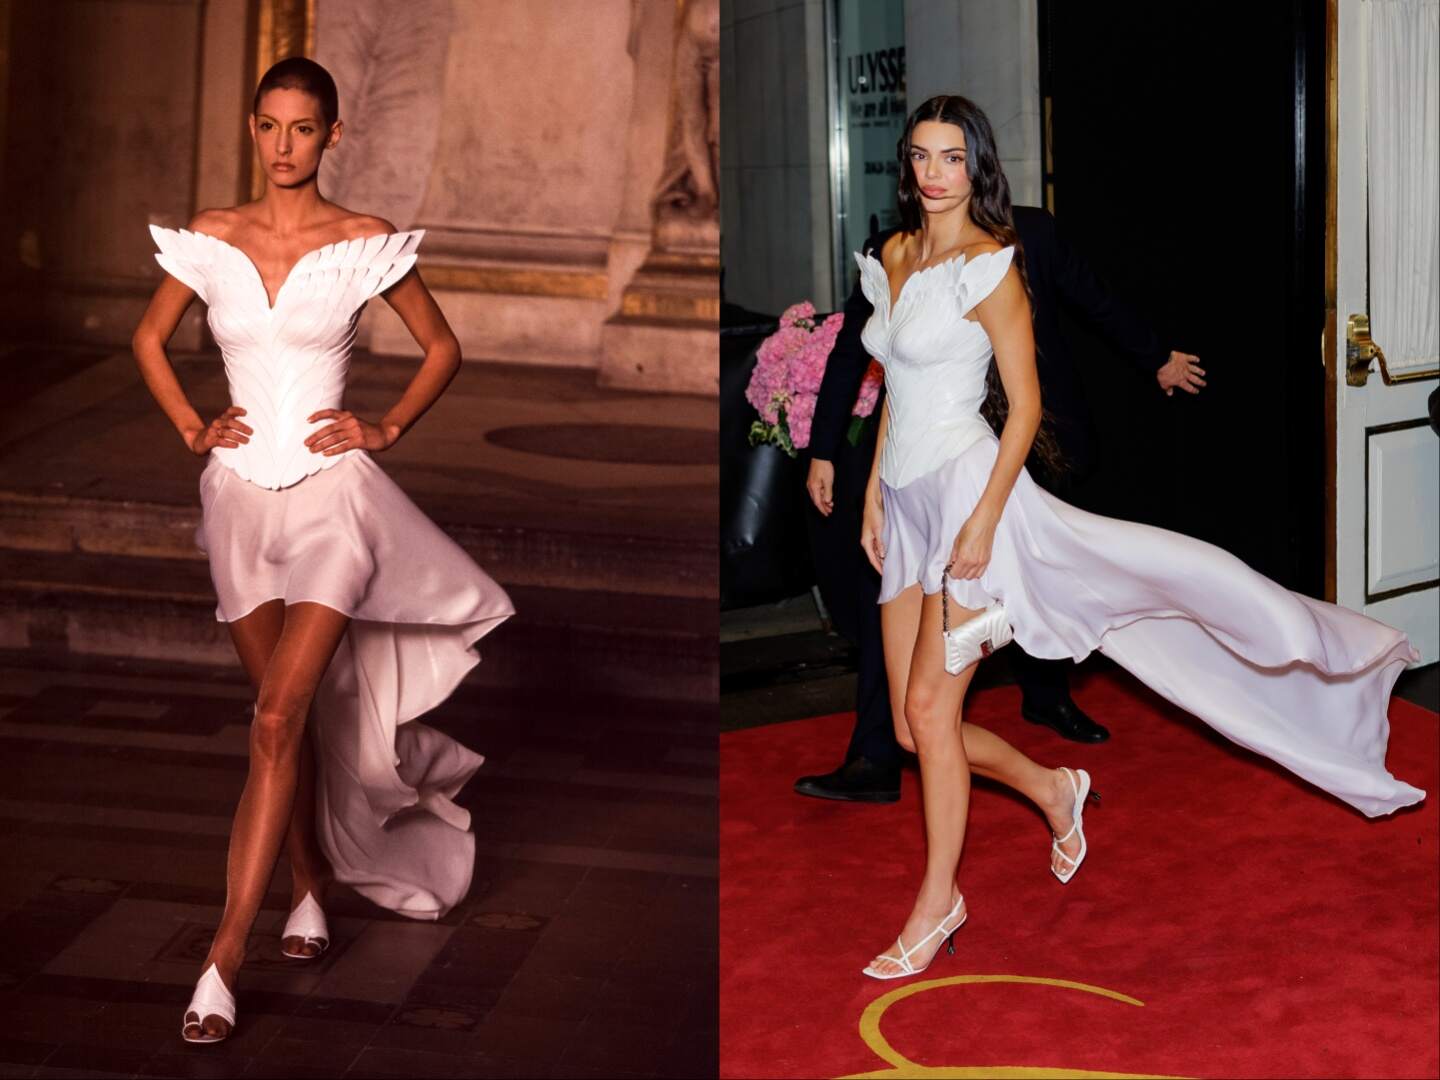 A model wearing a white dress in 1997 alongside a photo of Kendall Jenner wearing the same white dress almost 30 years later